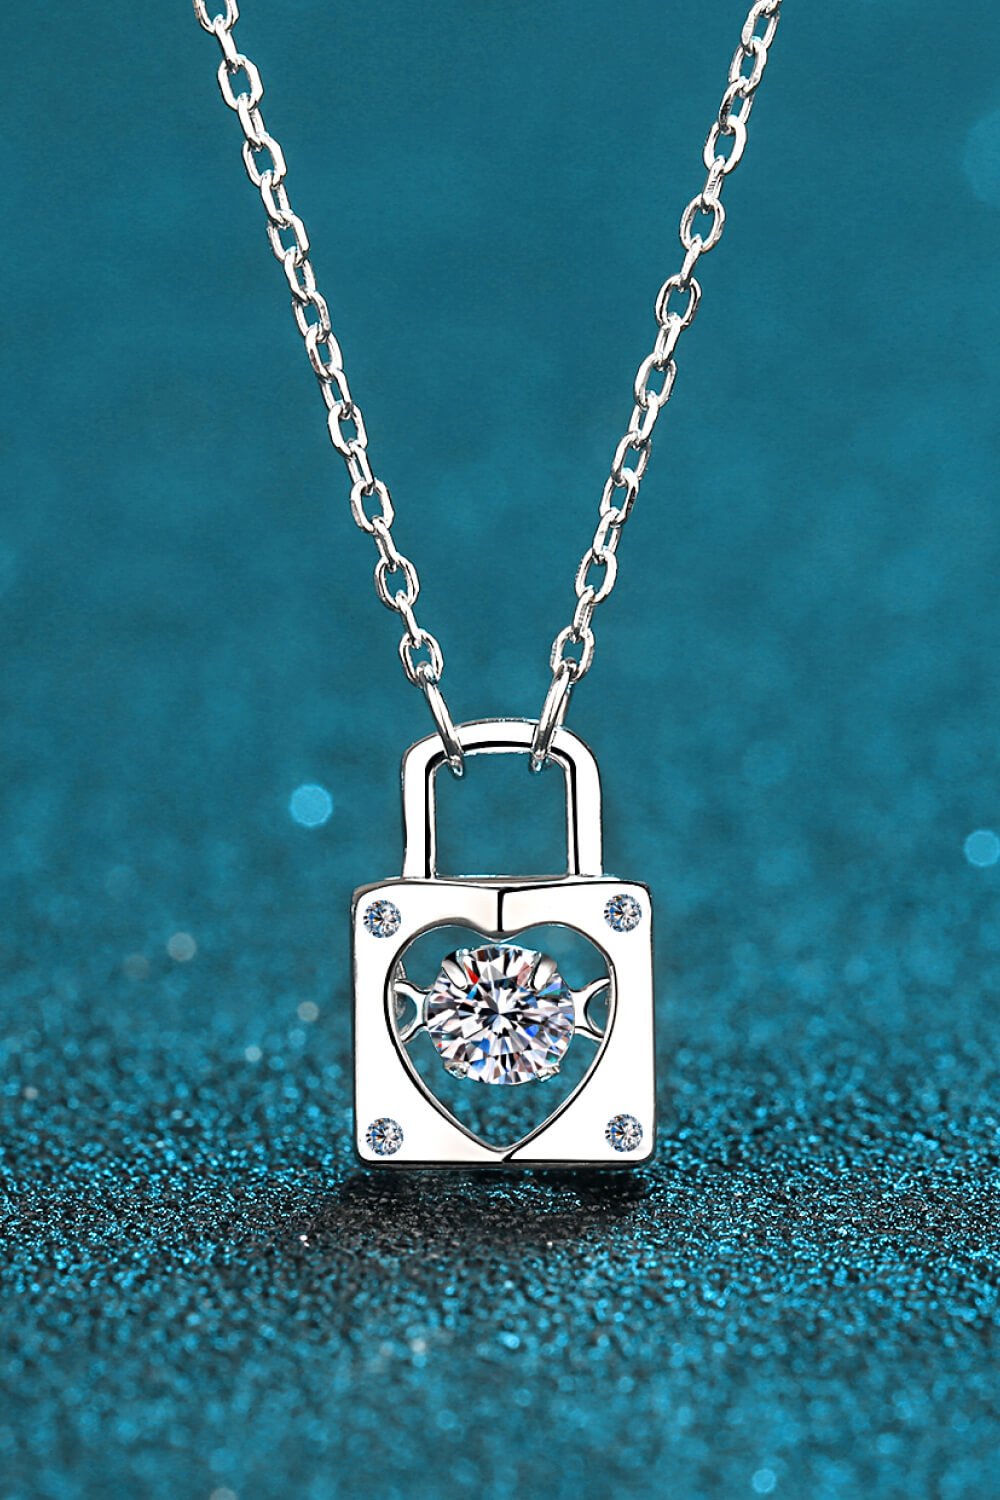 "Eternal Love - Mesmerizing Moissanite Pendant Necklace - A Timeless Celebration of Your Affection" - Guy Christopher